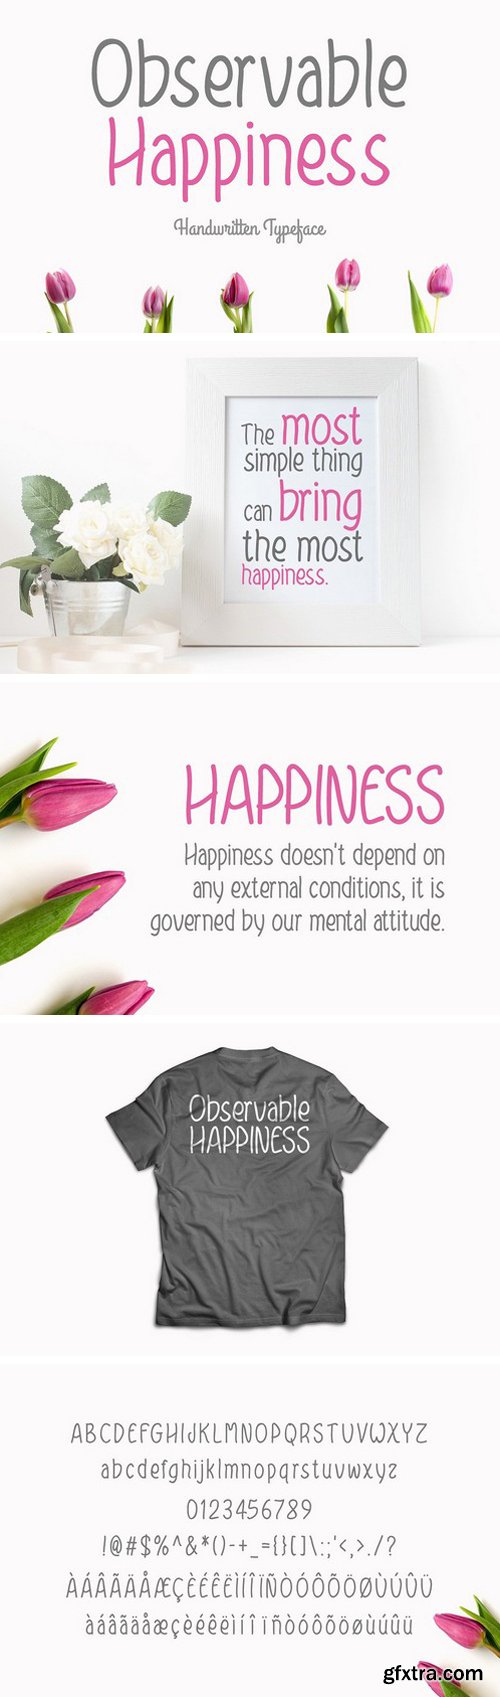 CM - Observable Happiness Typeface 2276842